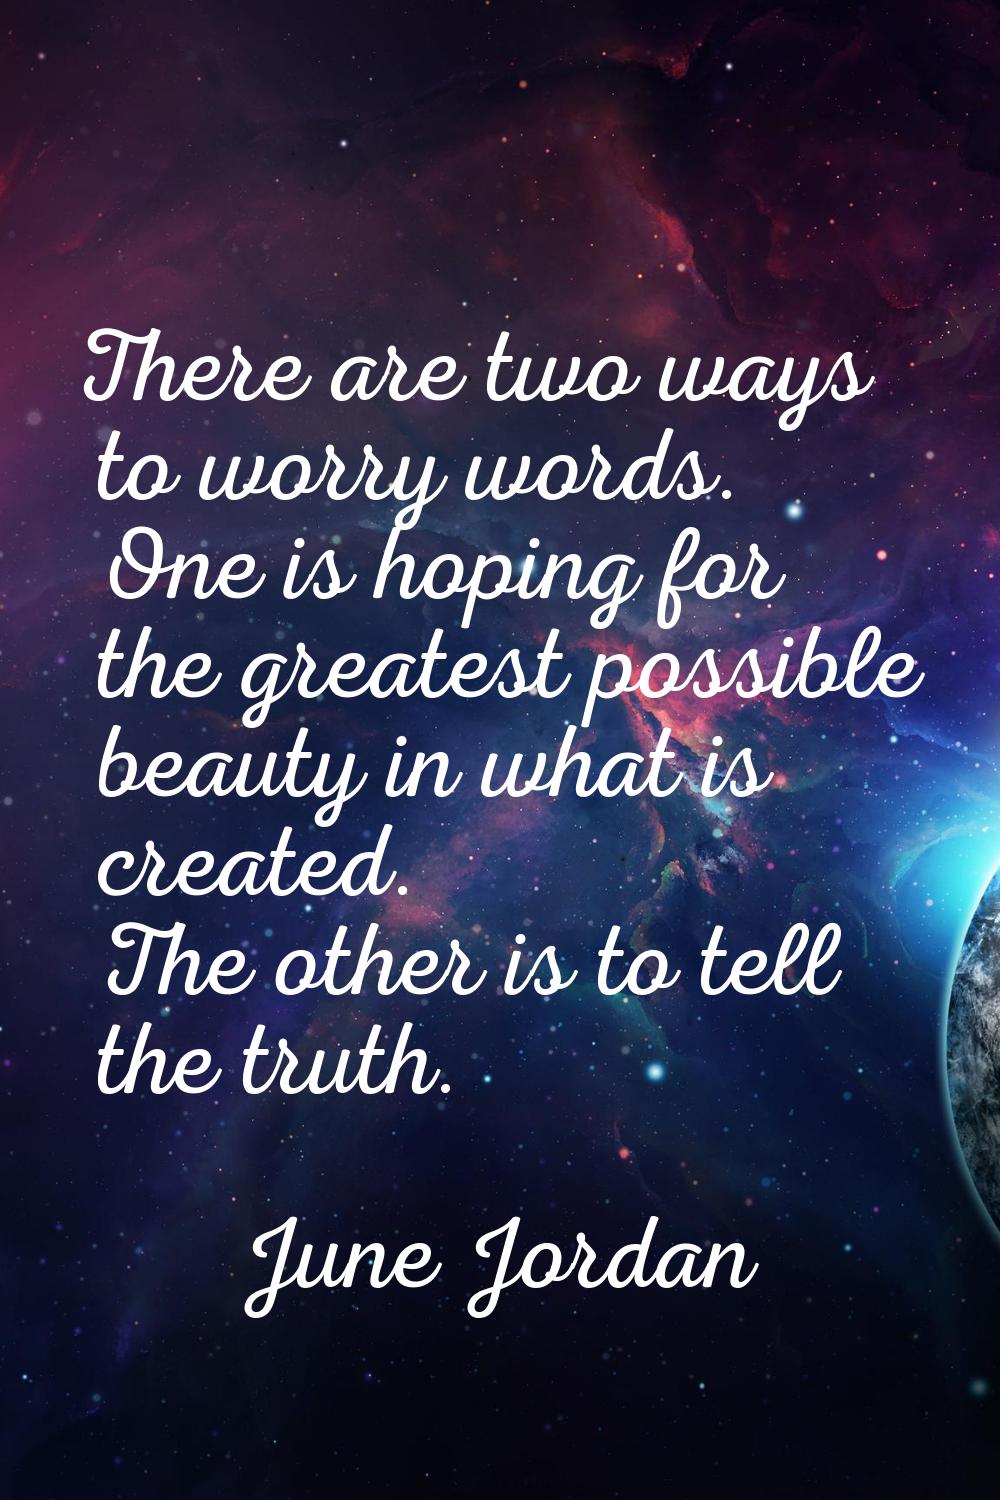 There are two ways to worry words. One is hoping for the greatest possible beauty in what is create